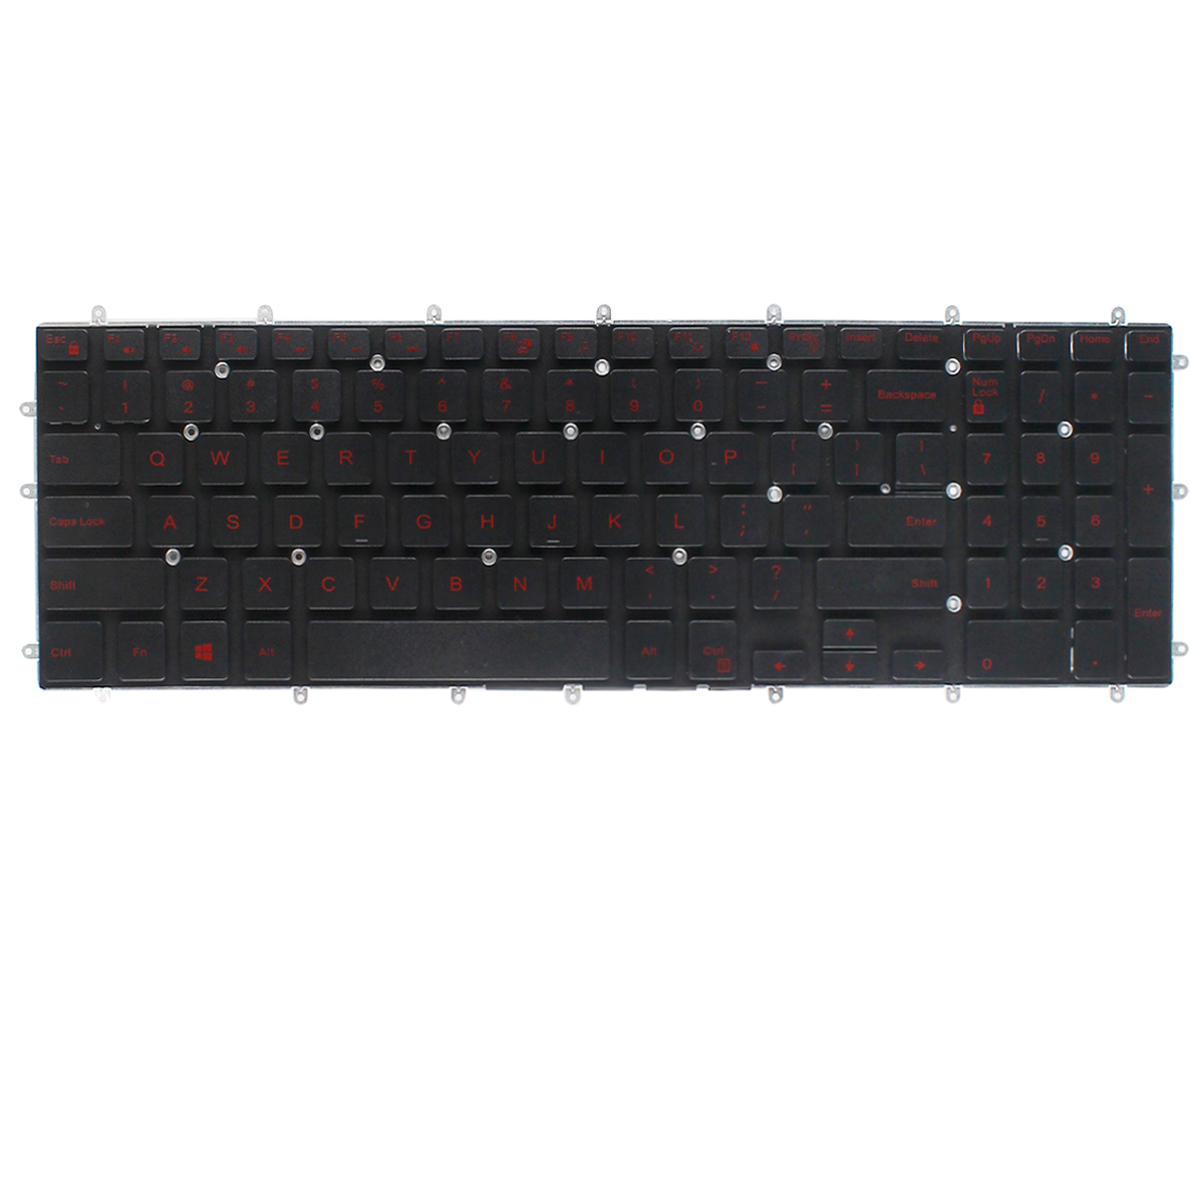 Compatible Keyboard for Dell Inspiron 5565 5567 5665 5765 5767 7